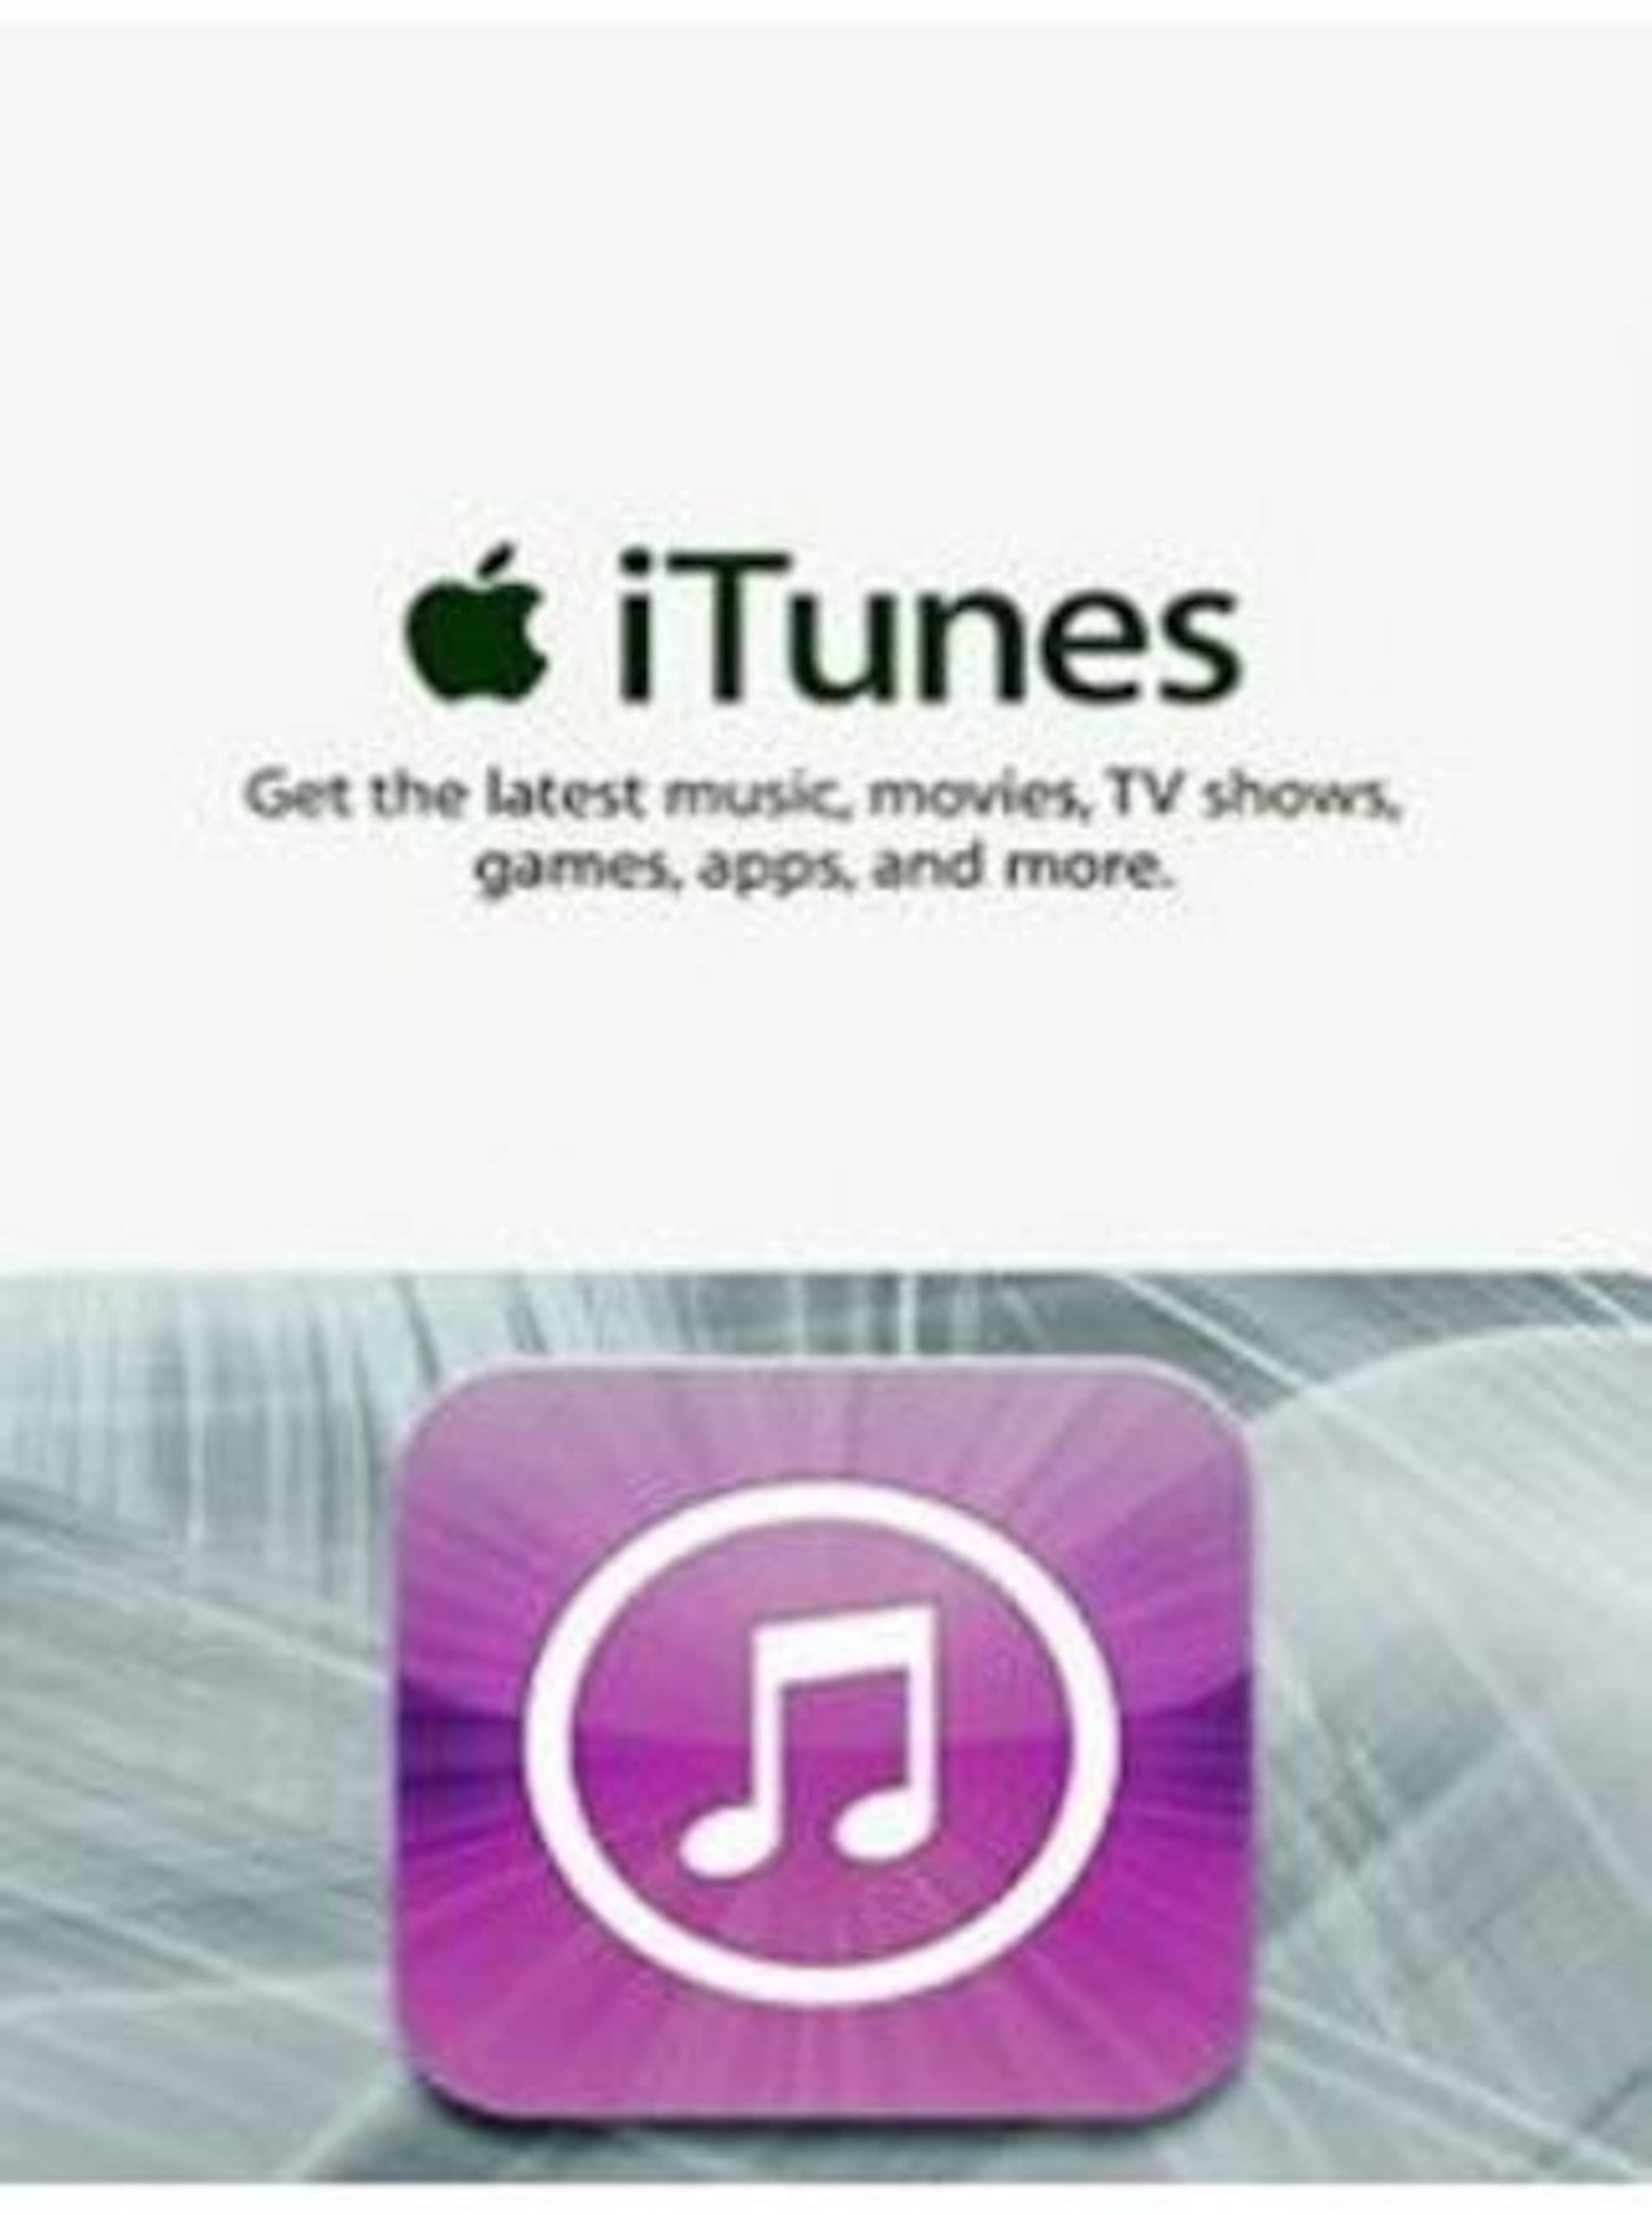 20% Discount on iTunes Gift Cards